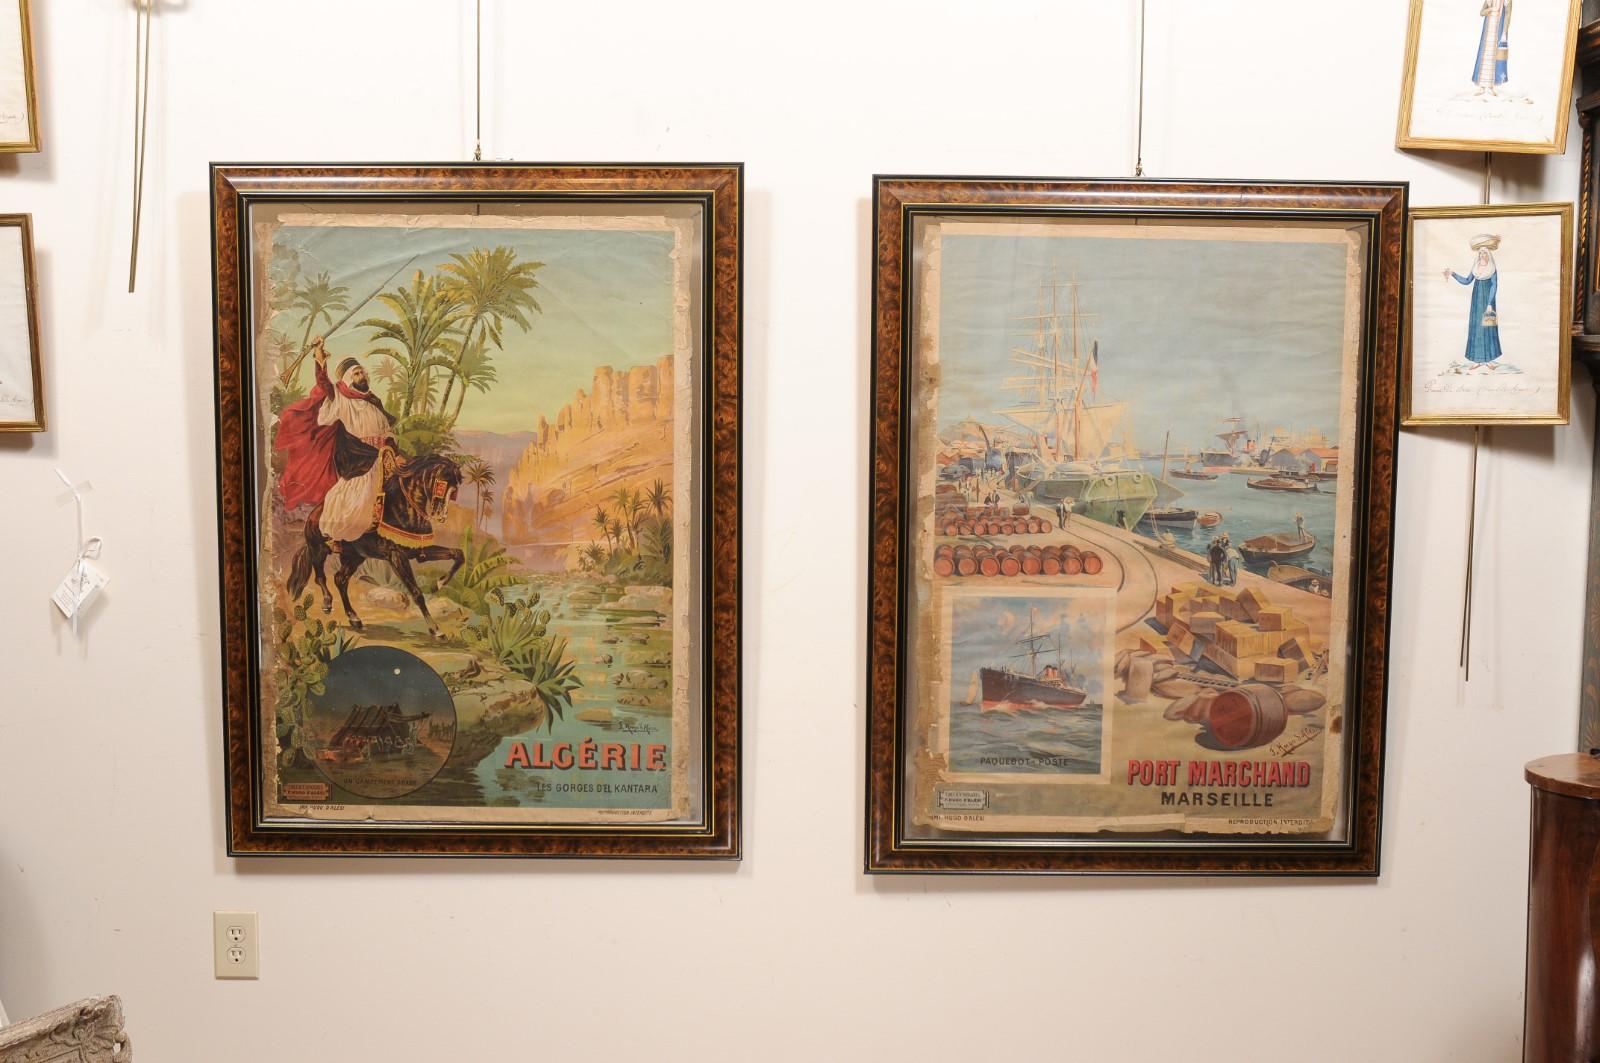 Pair of Framed Original Early 20th Century French Travel Advertisements, Oil Painted on Linen